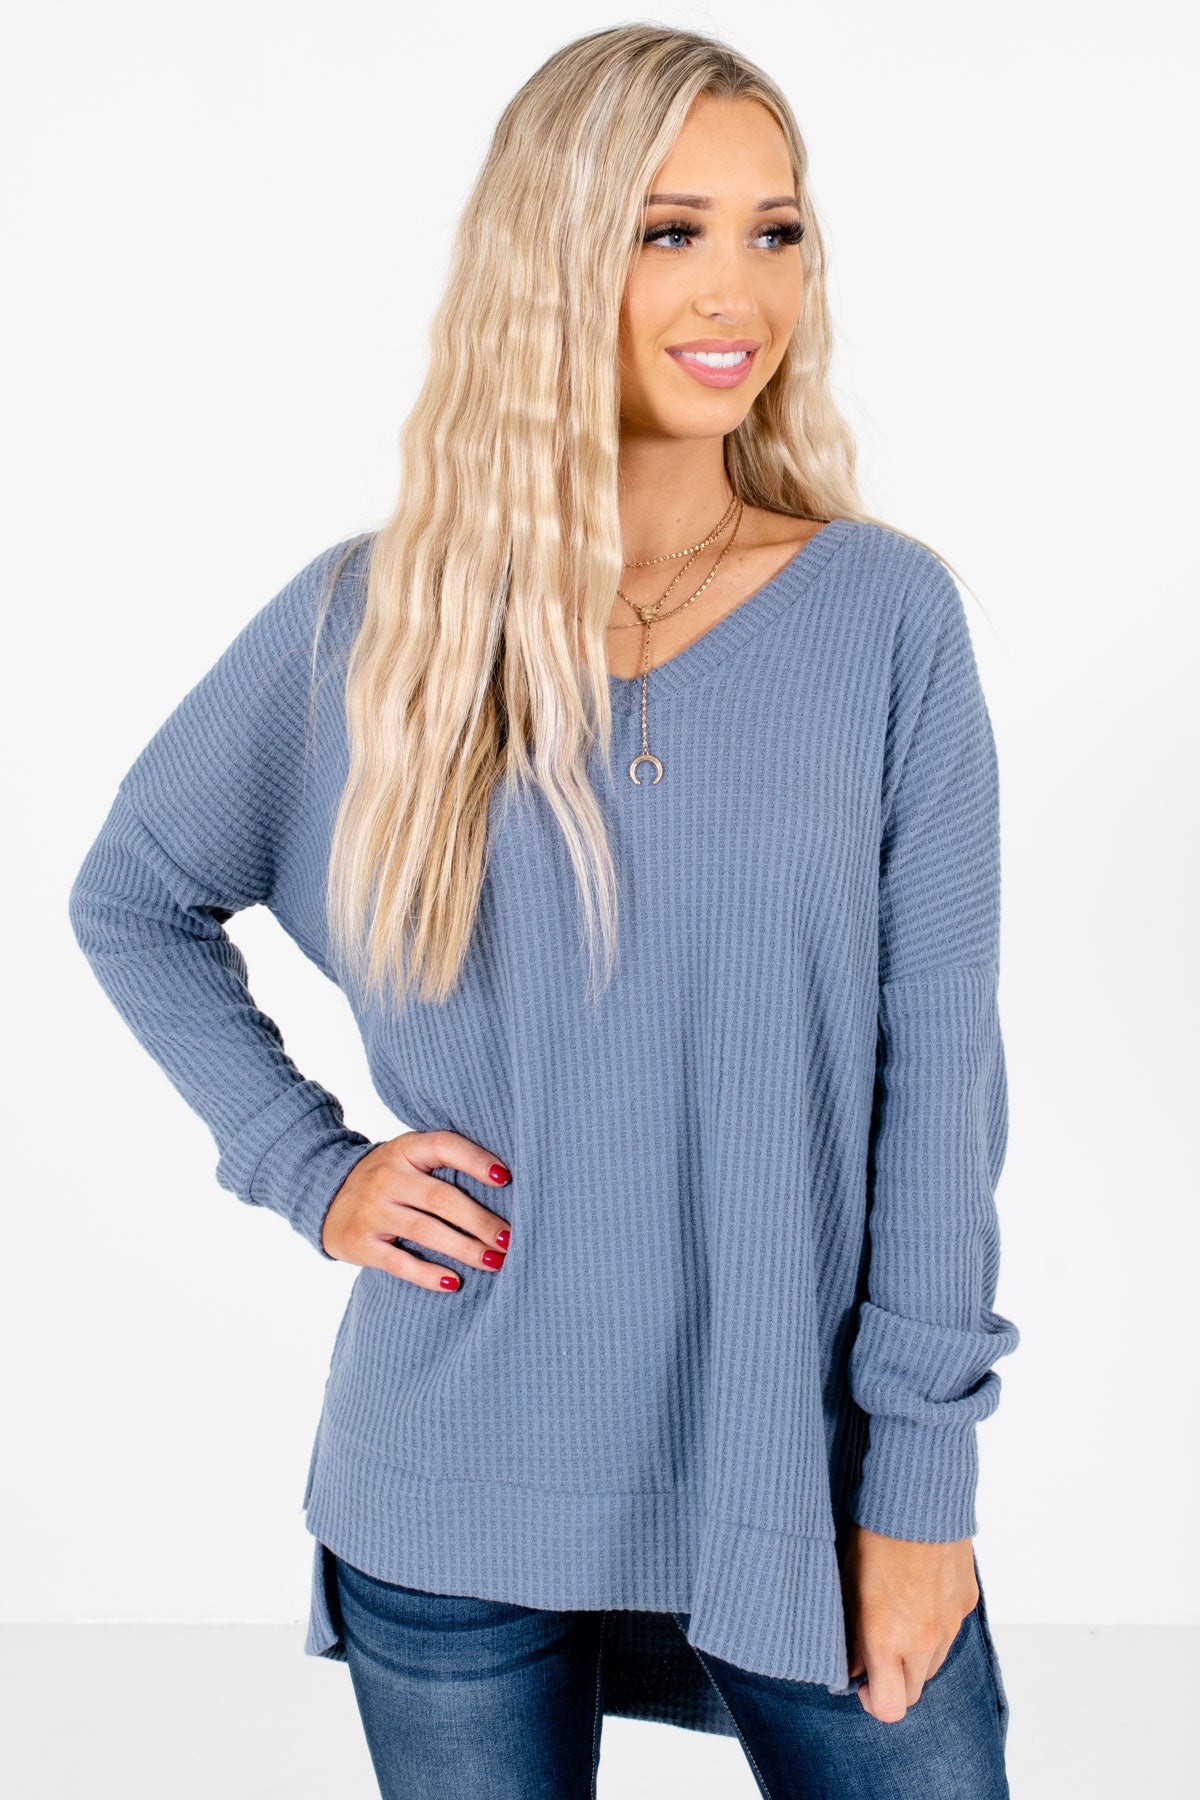 Blue High-Quality Waffle Knit Material Boutique Tops for Women